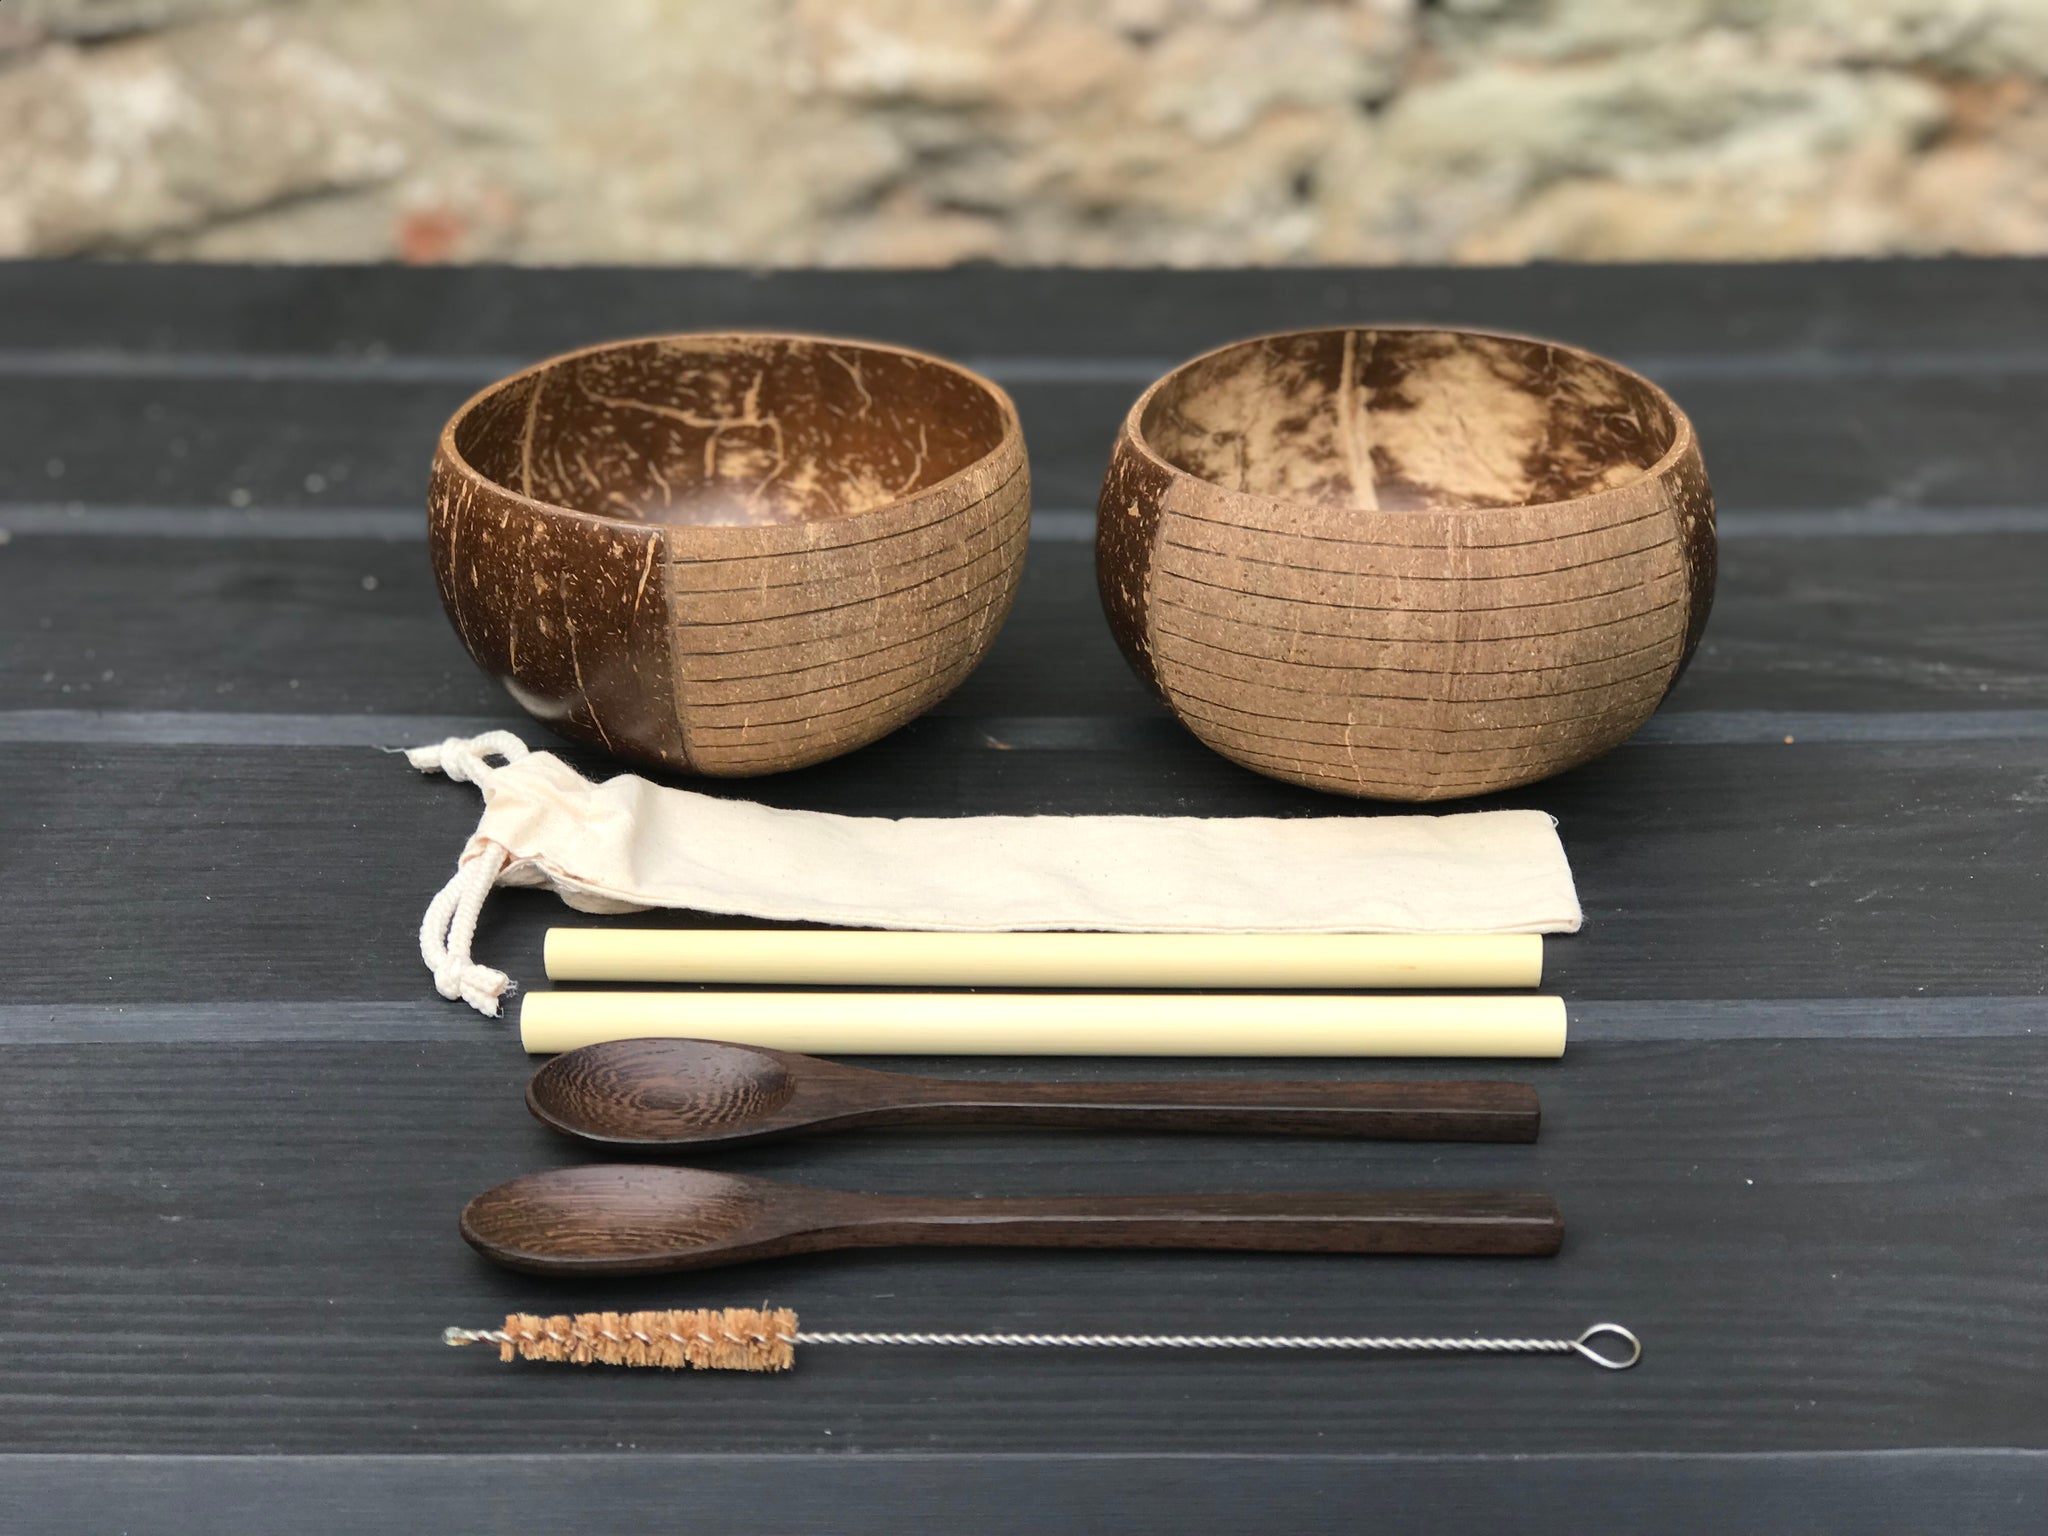 Two brown coconut bowls, two bamboo straws, two spoons, a cleaning brush and a straw pouch on a wooden table.